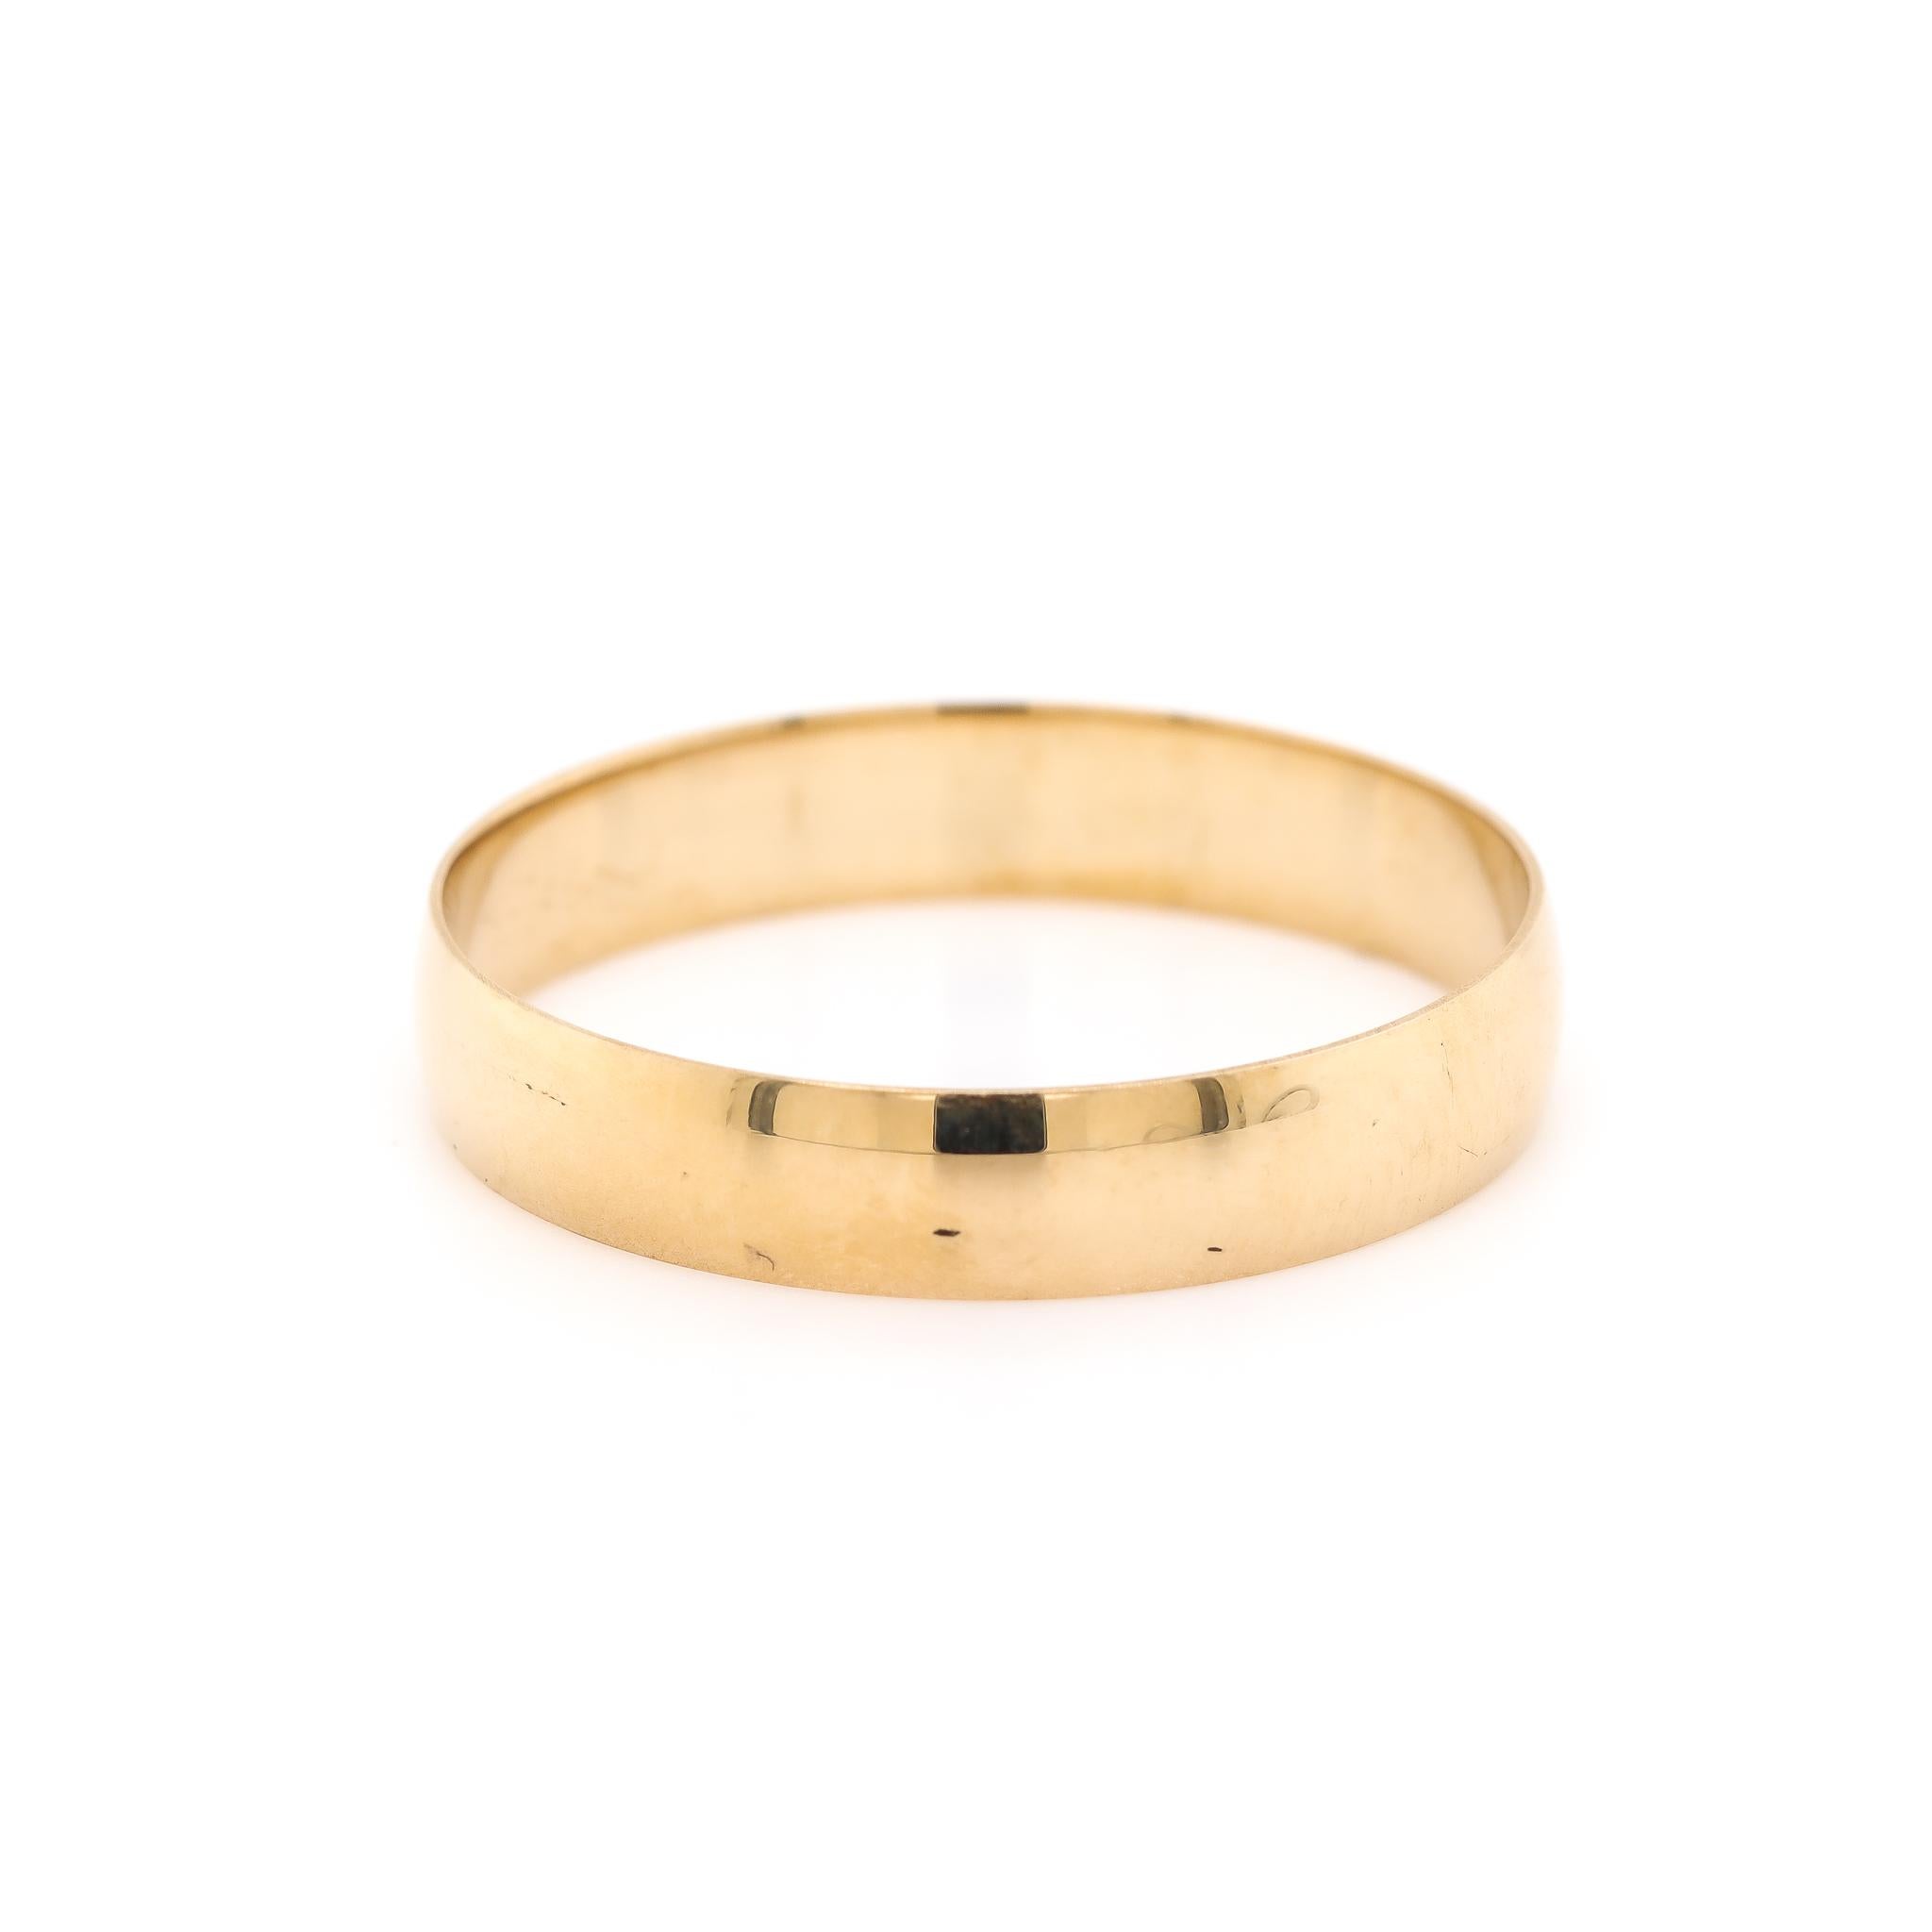 One man's custom made polished 10K yellow gold, wedding band with a knife-edge shank. The band is a size 11. The band weighs a total of 1.90 grams. Stamped 